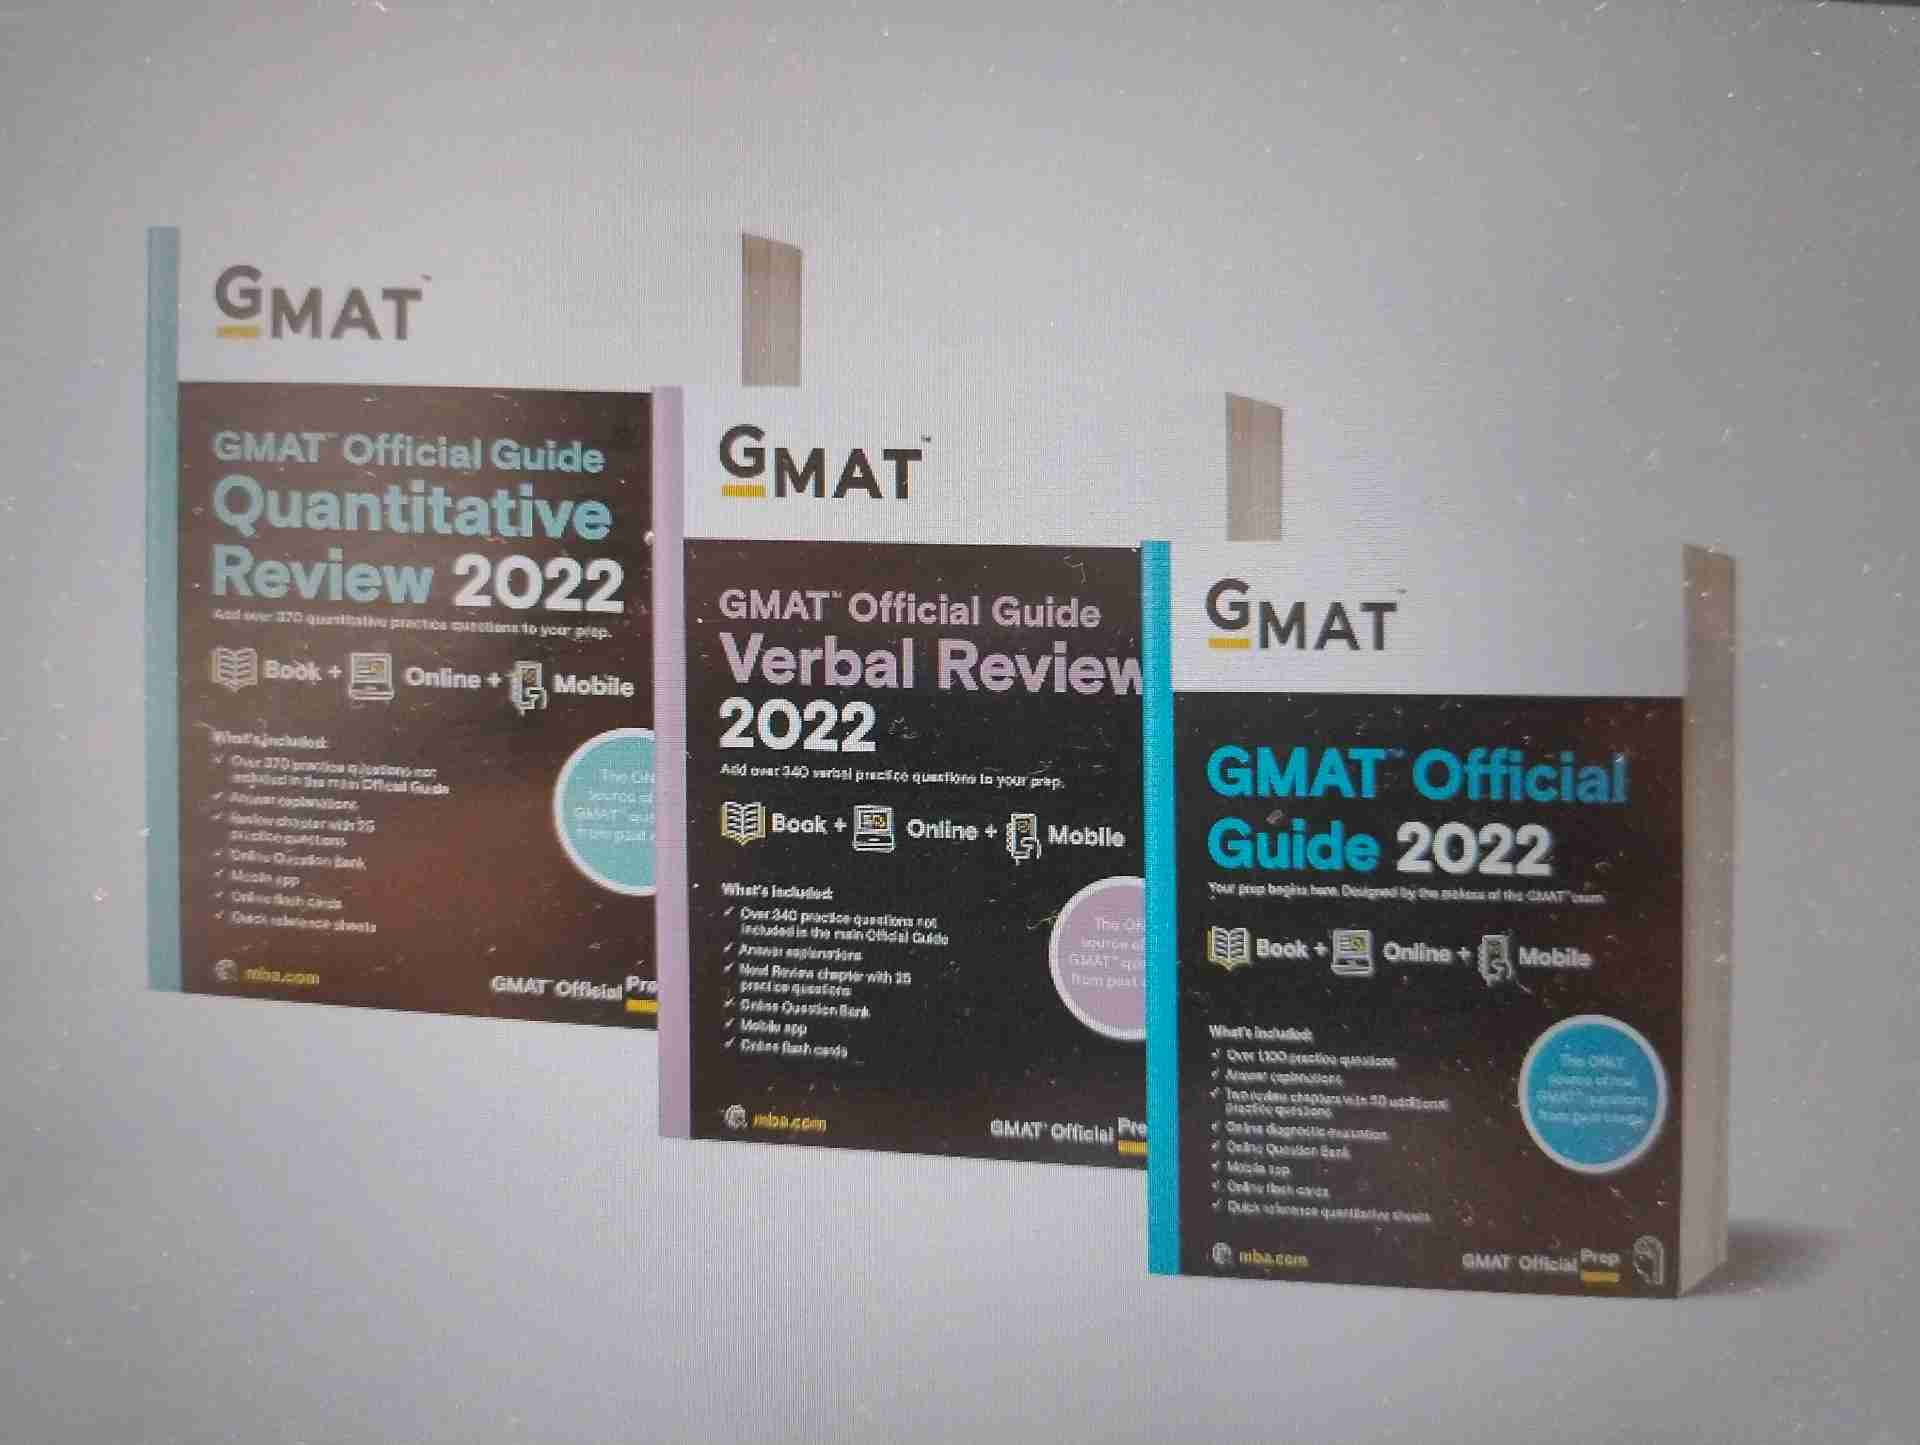 Gmat Official Guide 2022 + Gmat Official Guide Verbal Review 2022 + Gmat Official Guide Quantitative Review 2022